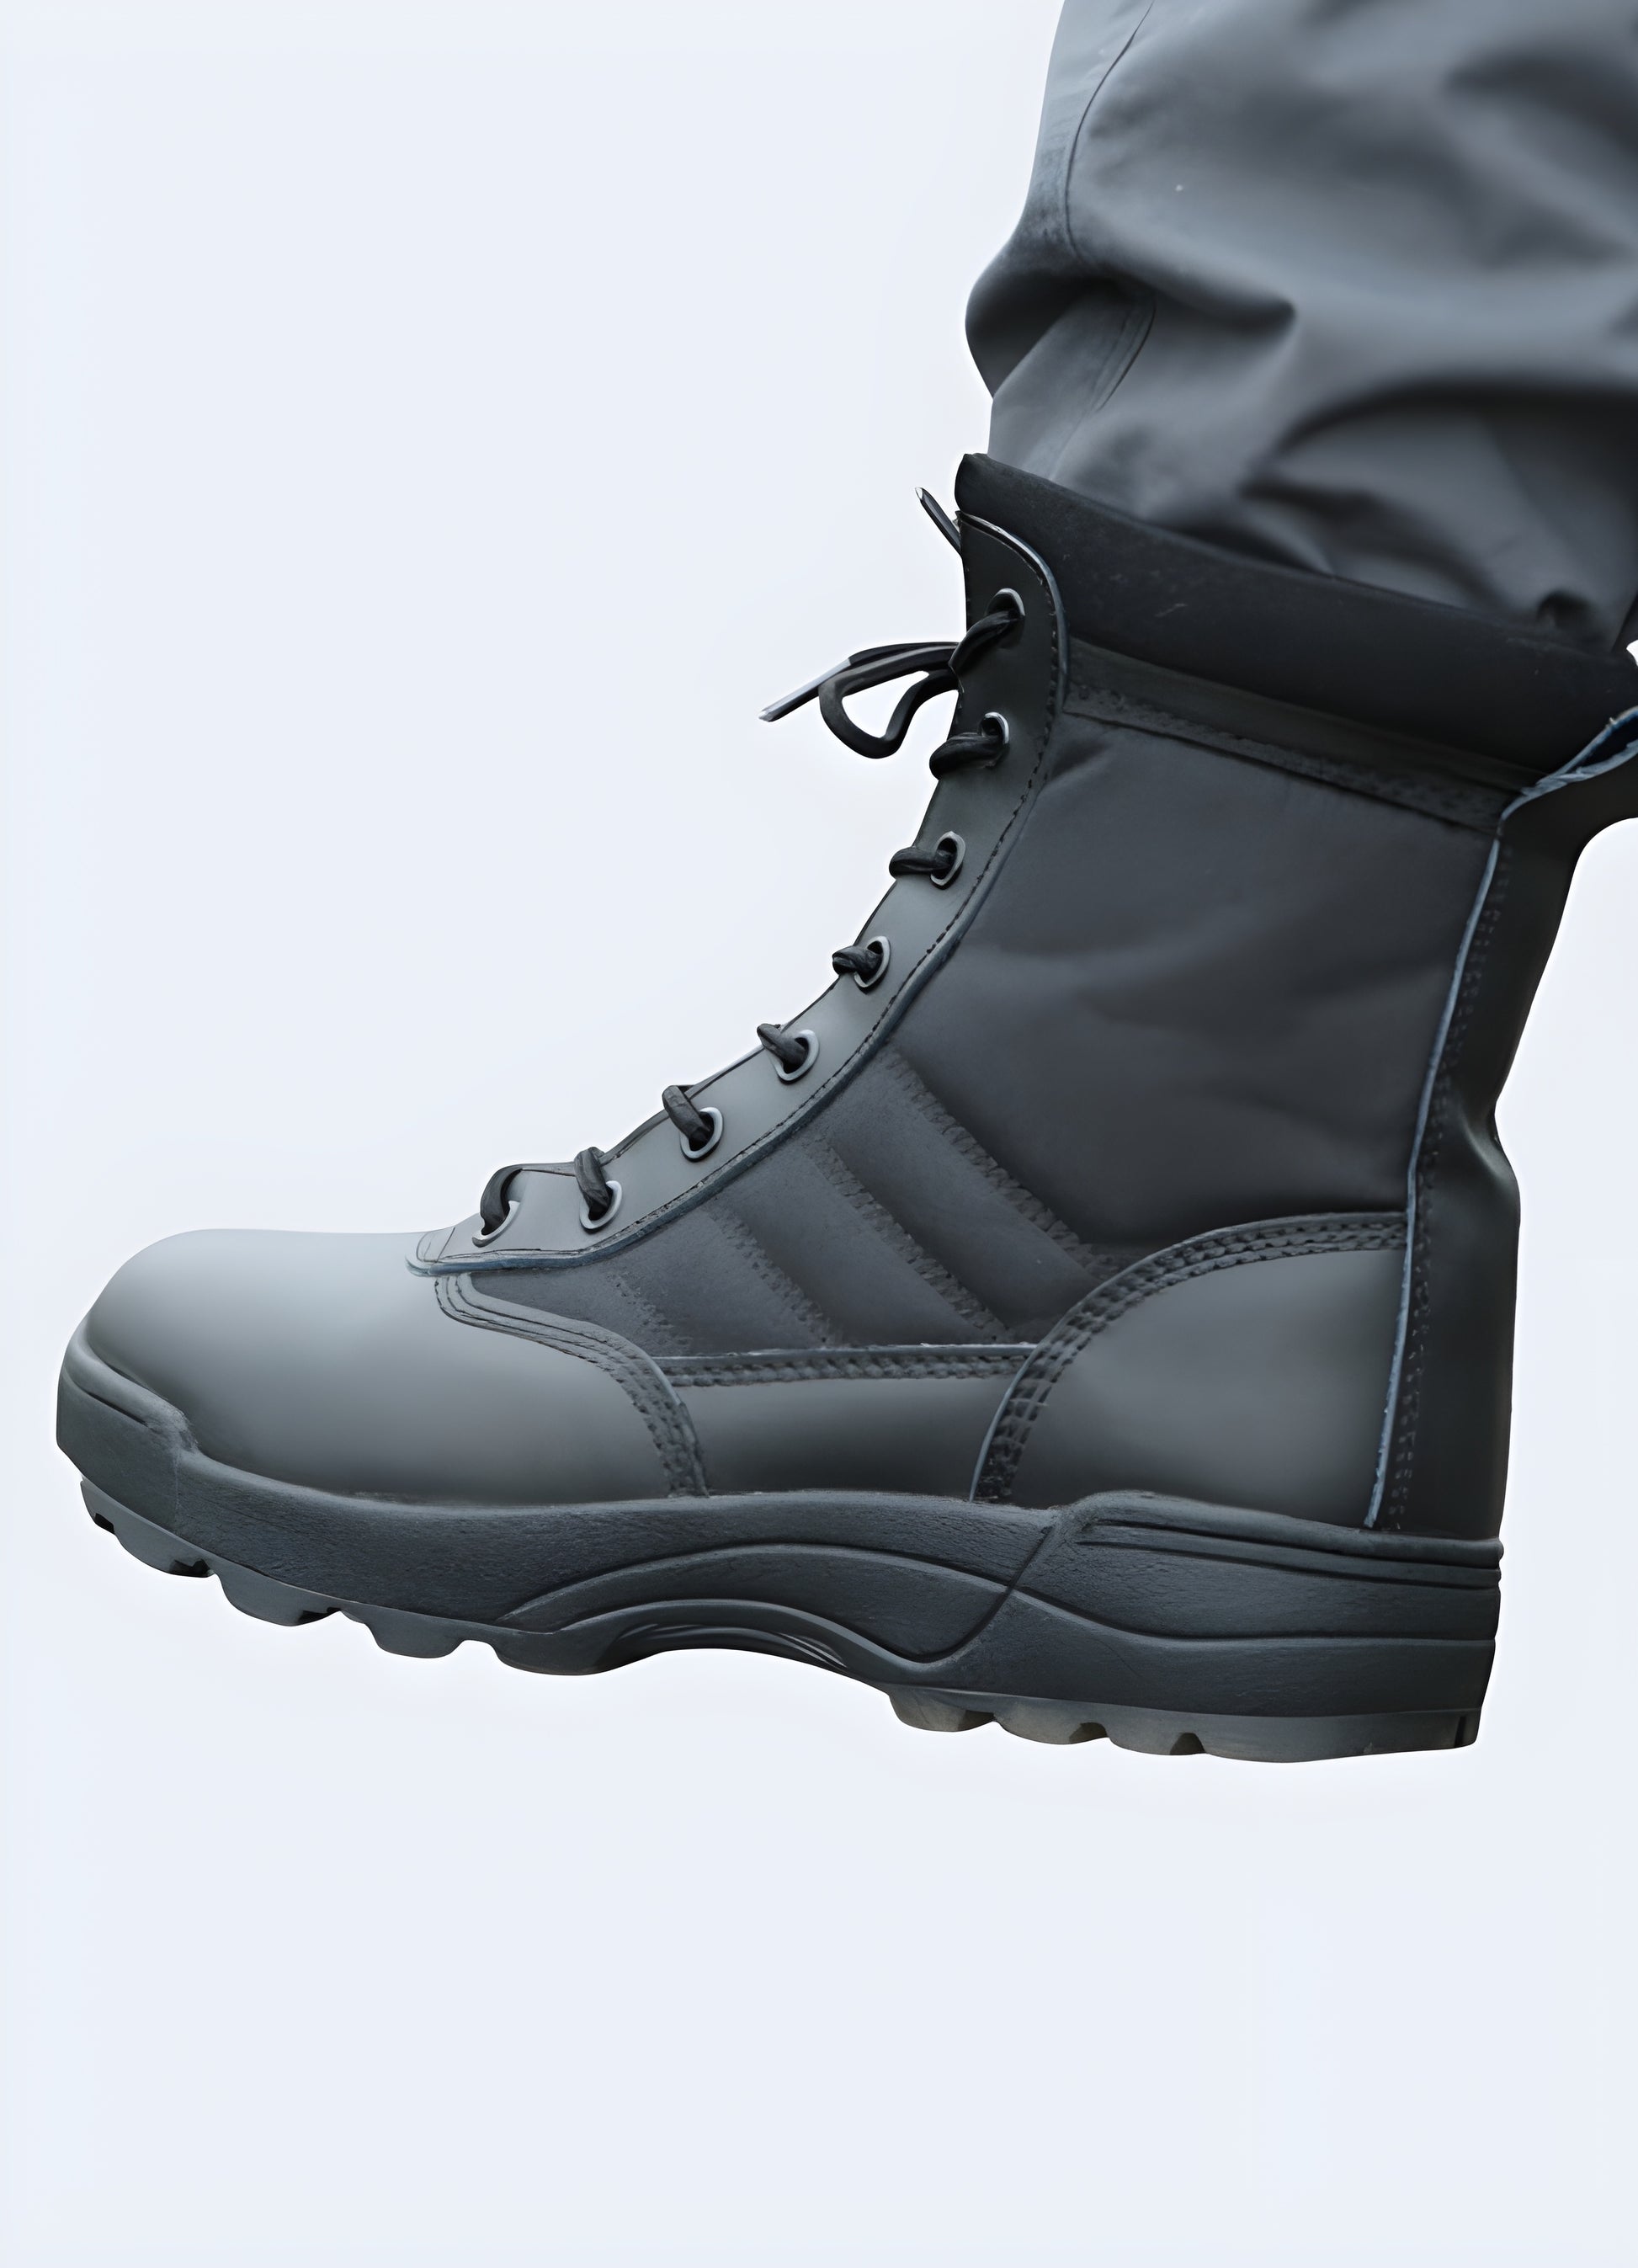 Black tactical side zip boots special forces, police, swat, military.